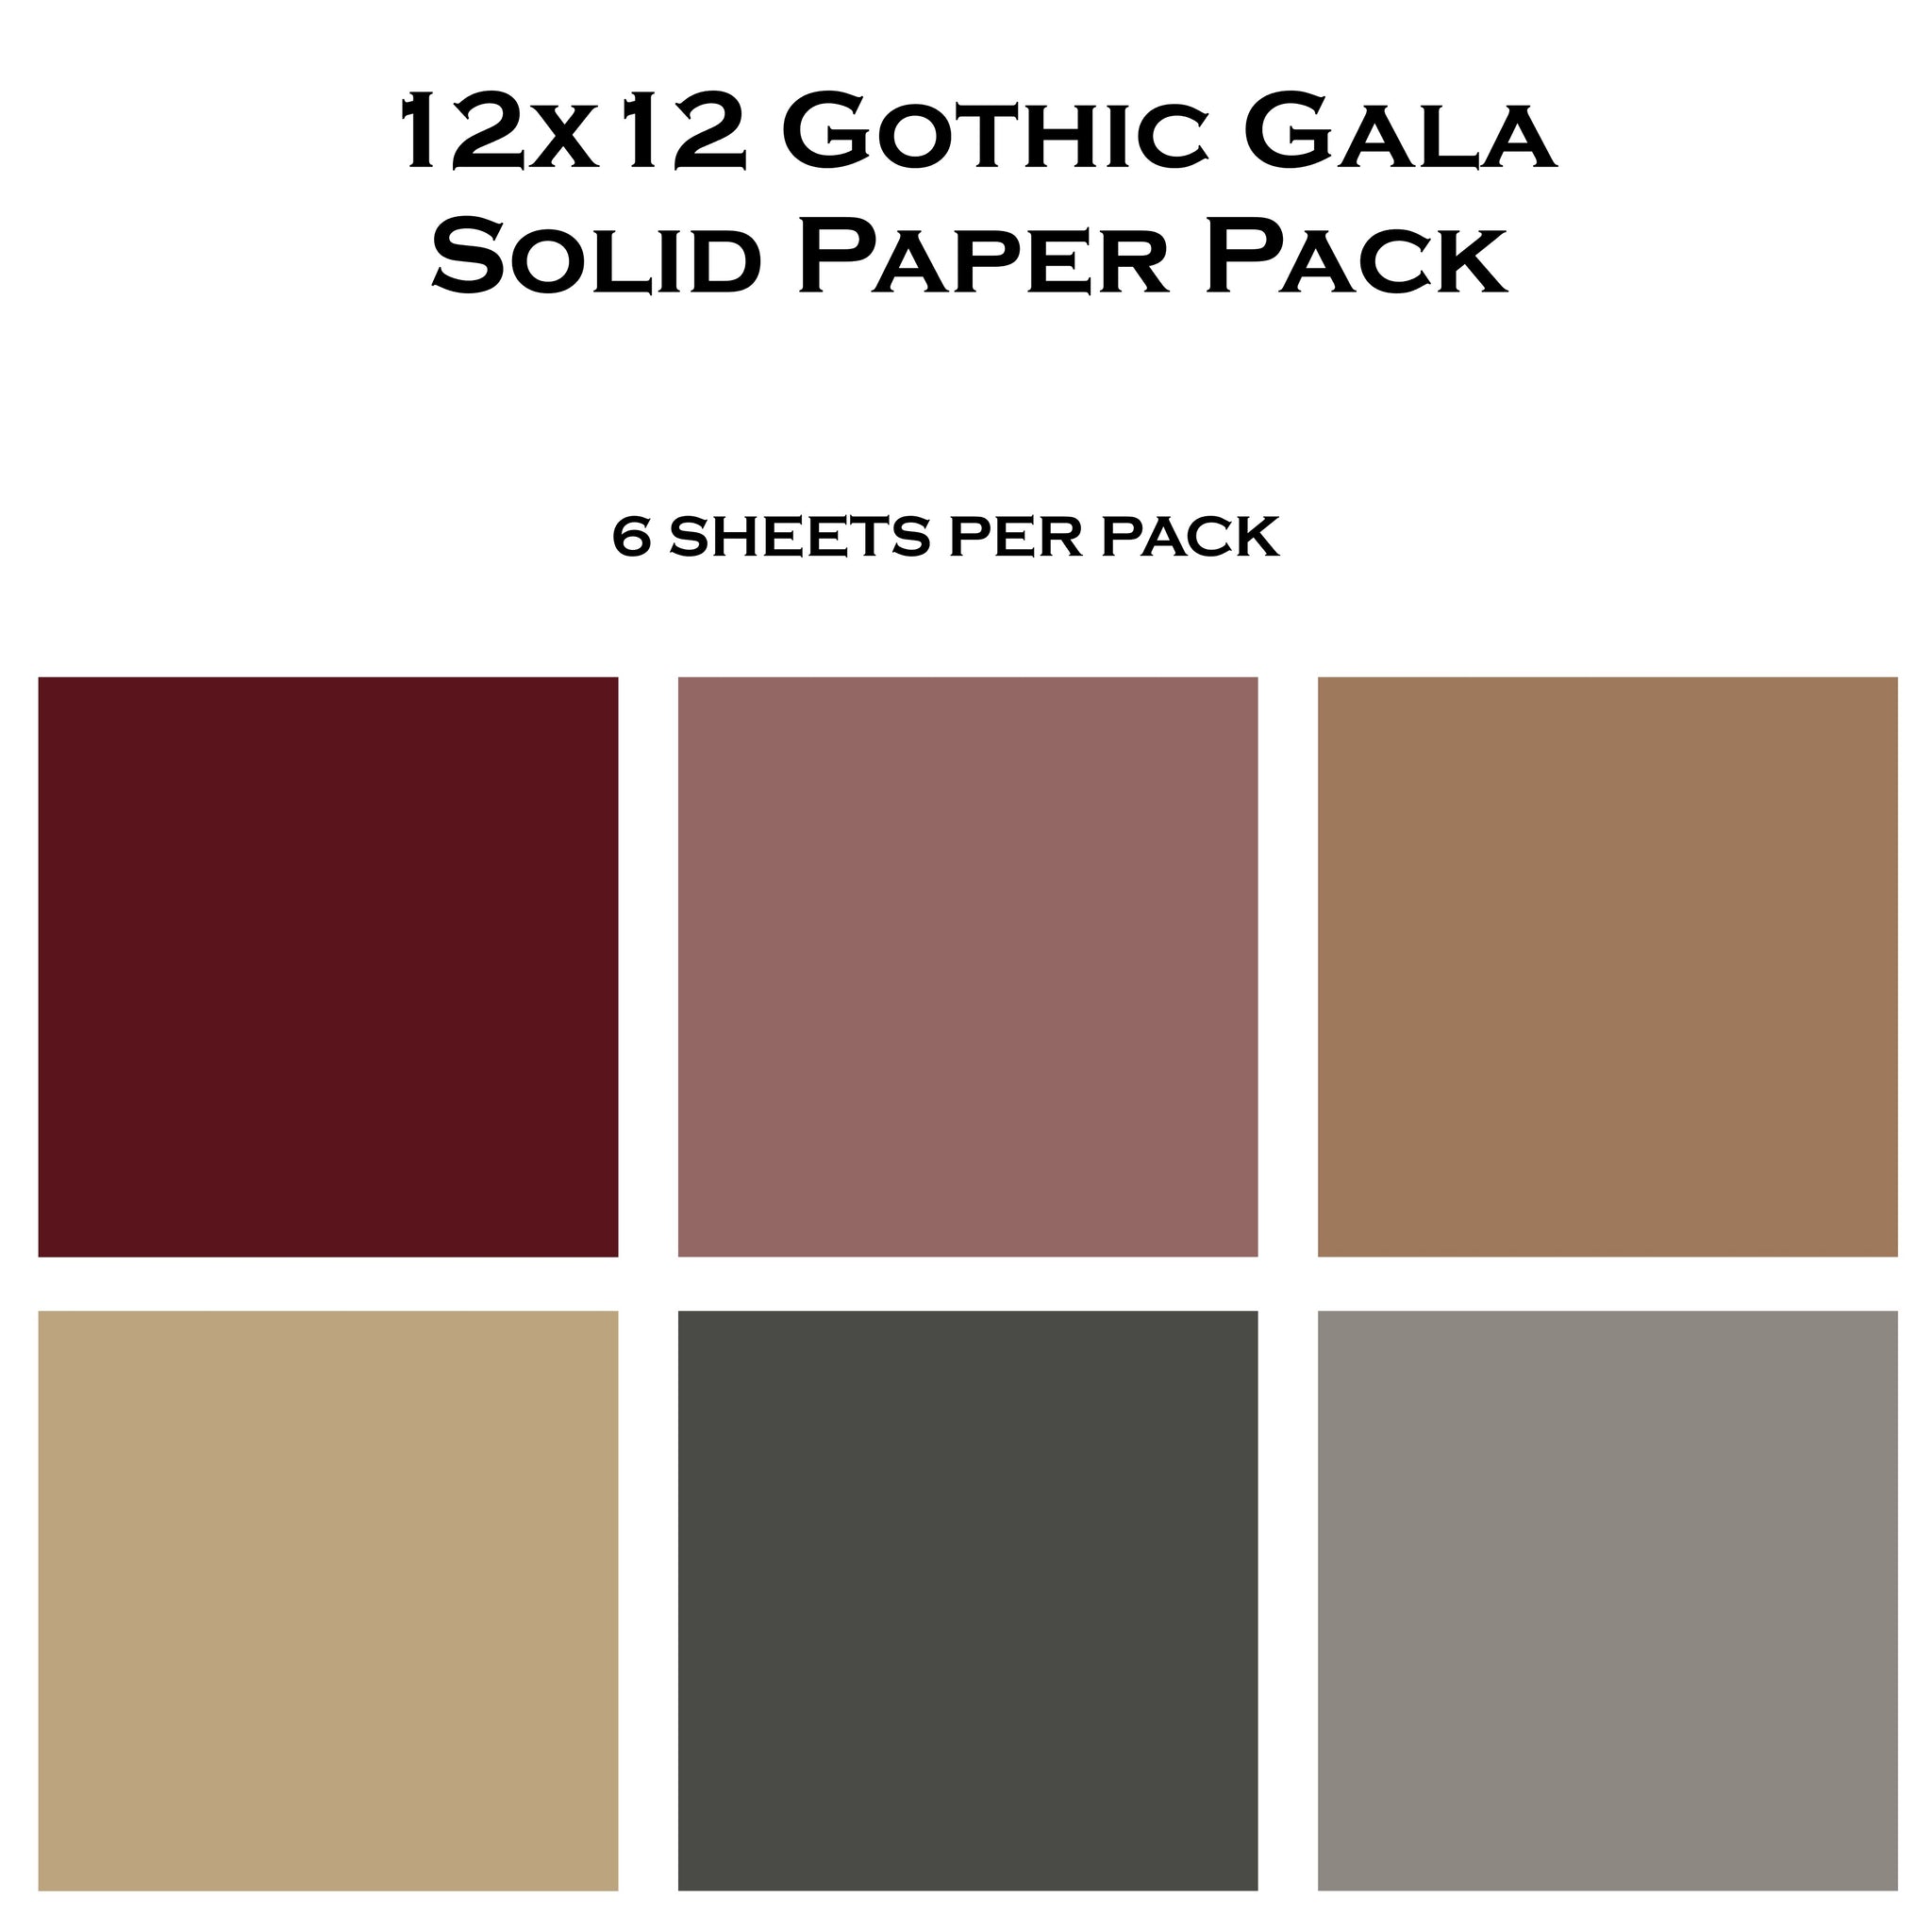 Gothic Gala 12x12 Solid Paper Pack